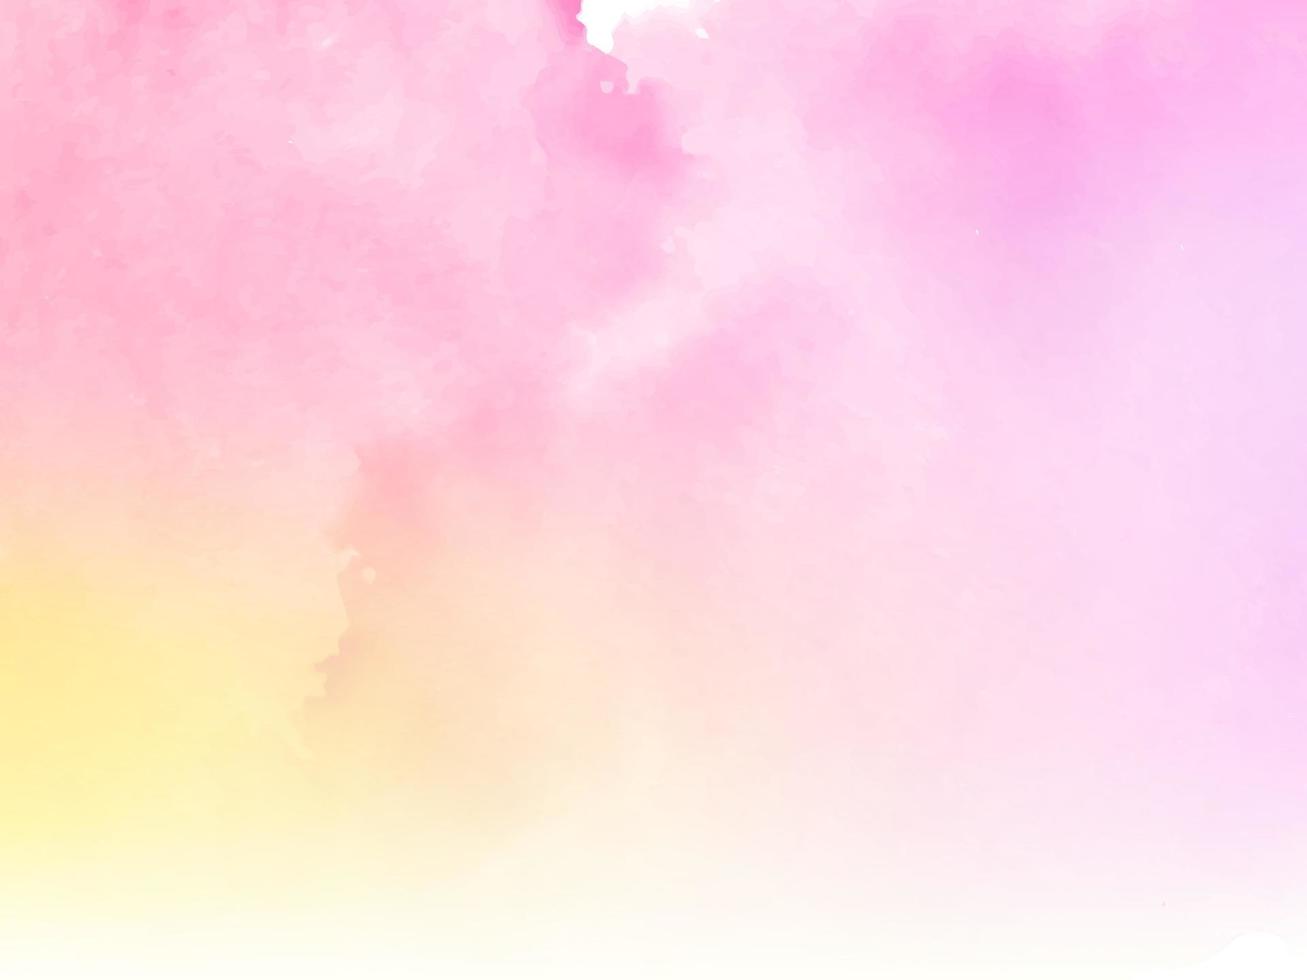 Abstract pink watercolor texture background vector